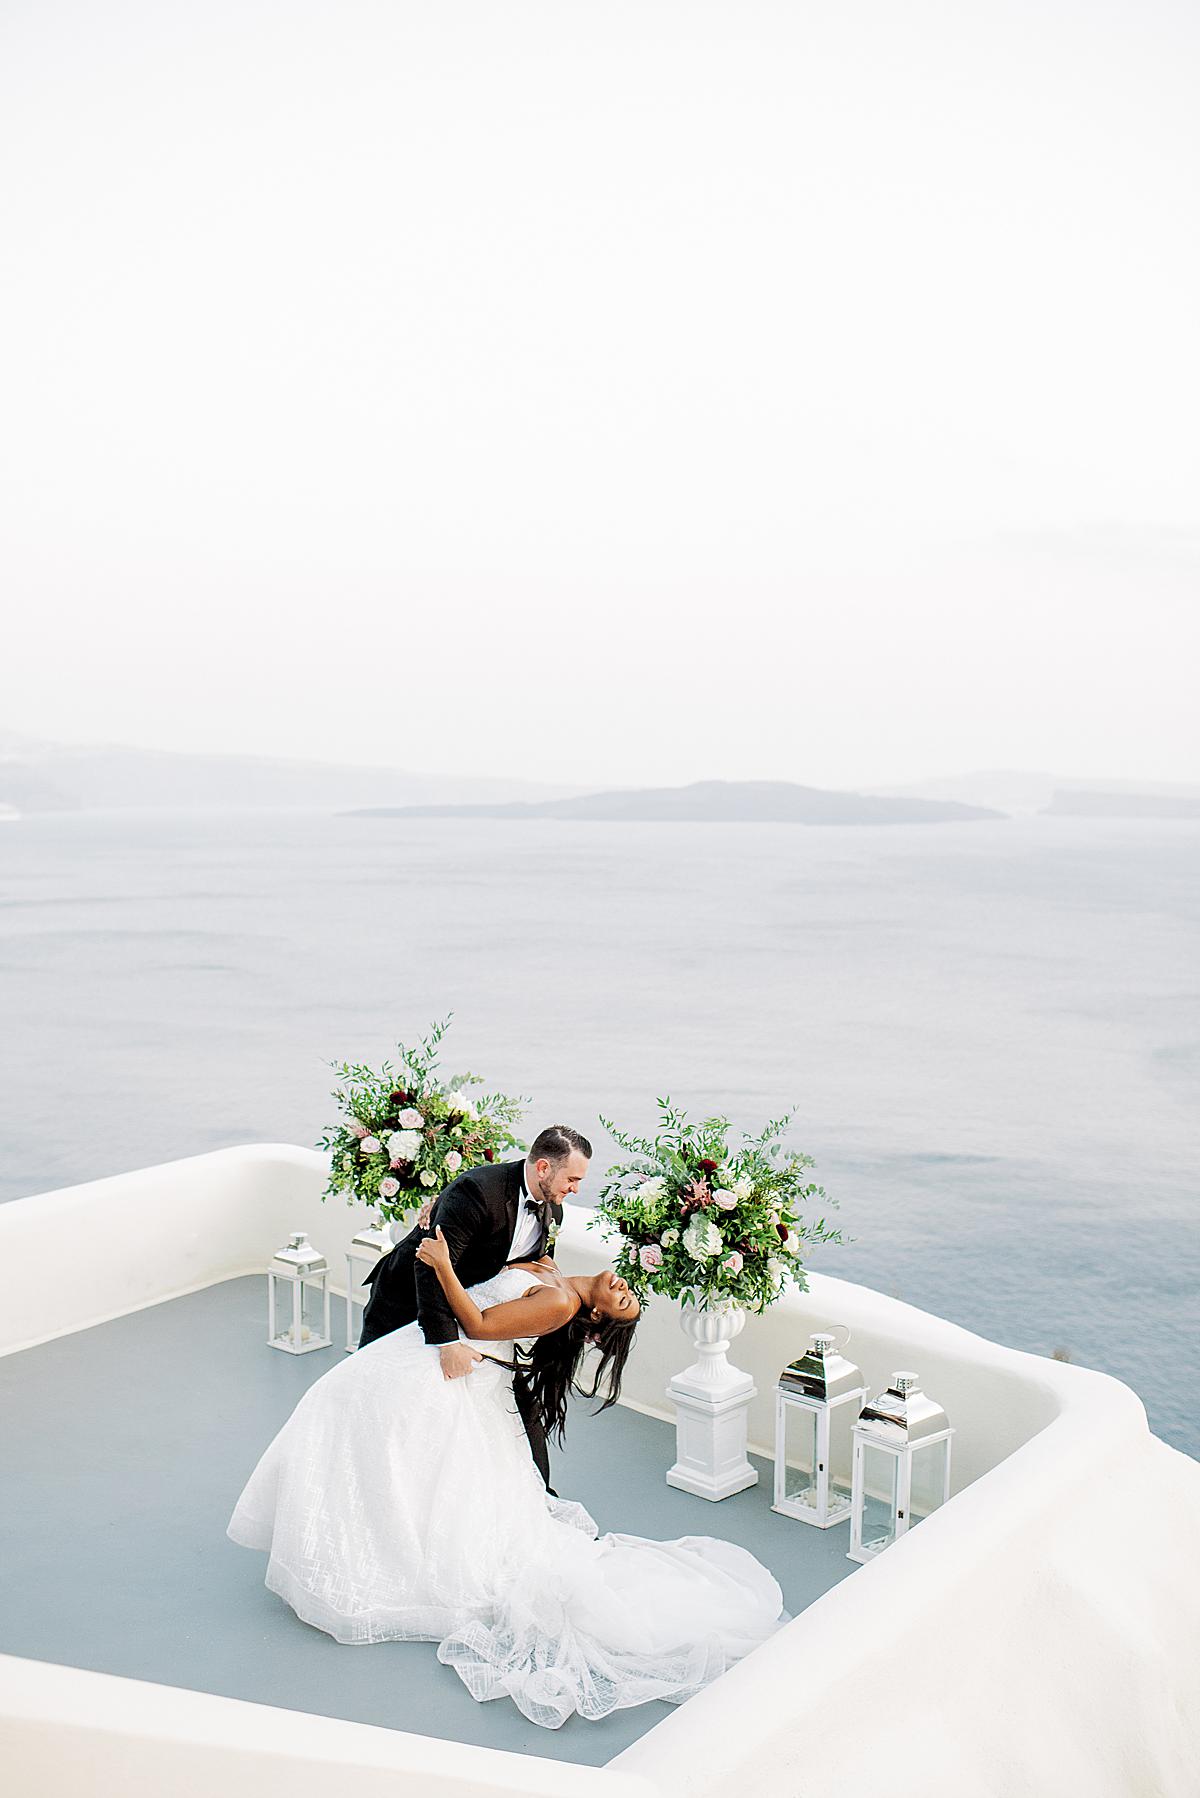 Bride and Groom first dance at Canaves Oia Santorini